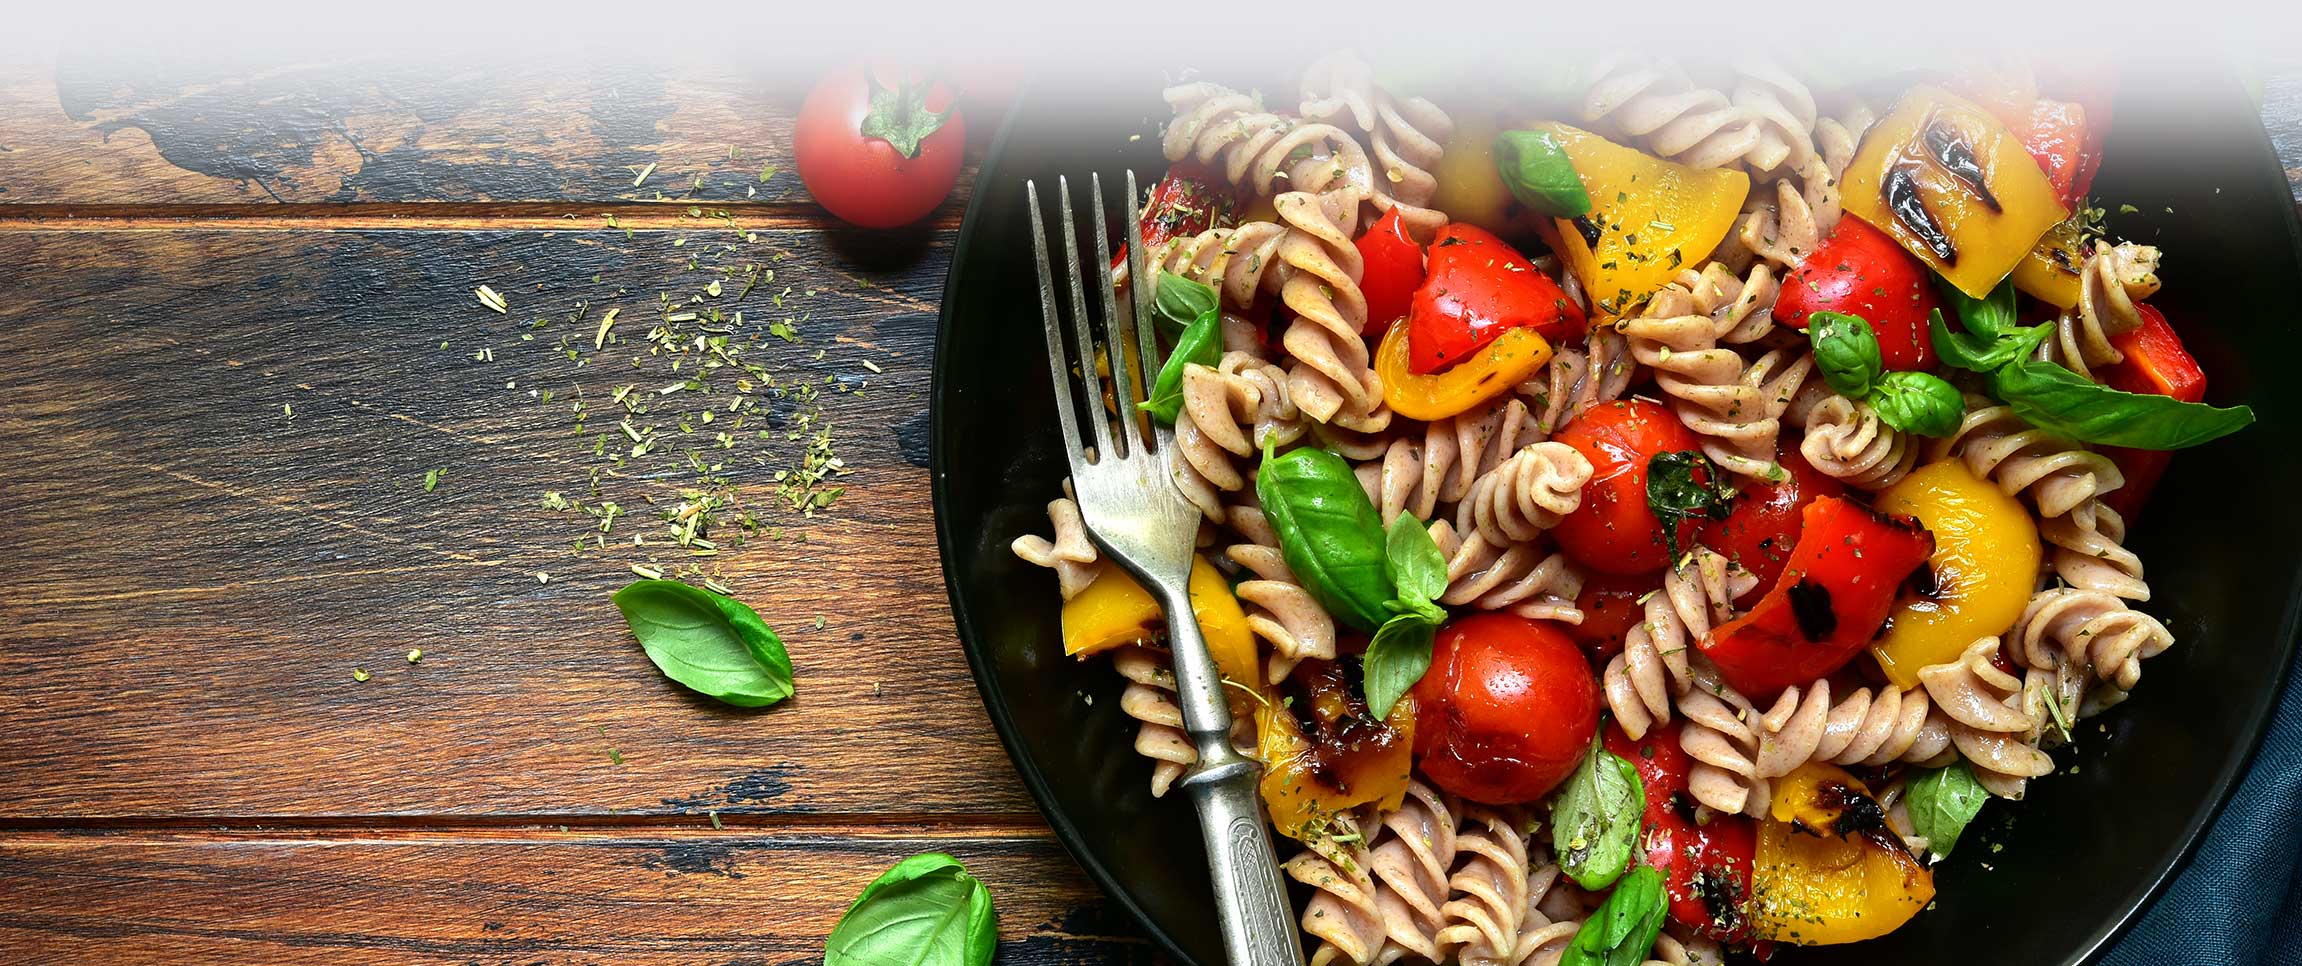 Fusilli and Fire Grilled Vegetable Salad with Balsamic Vinaigrette